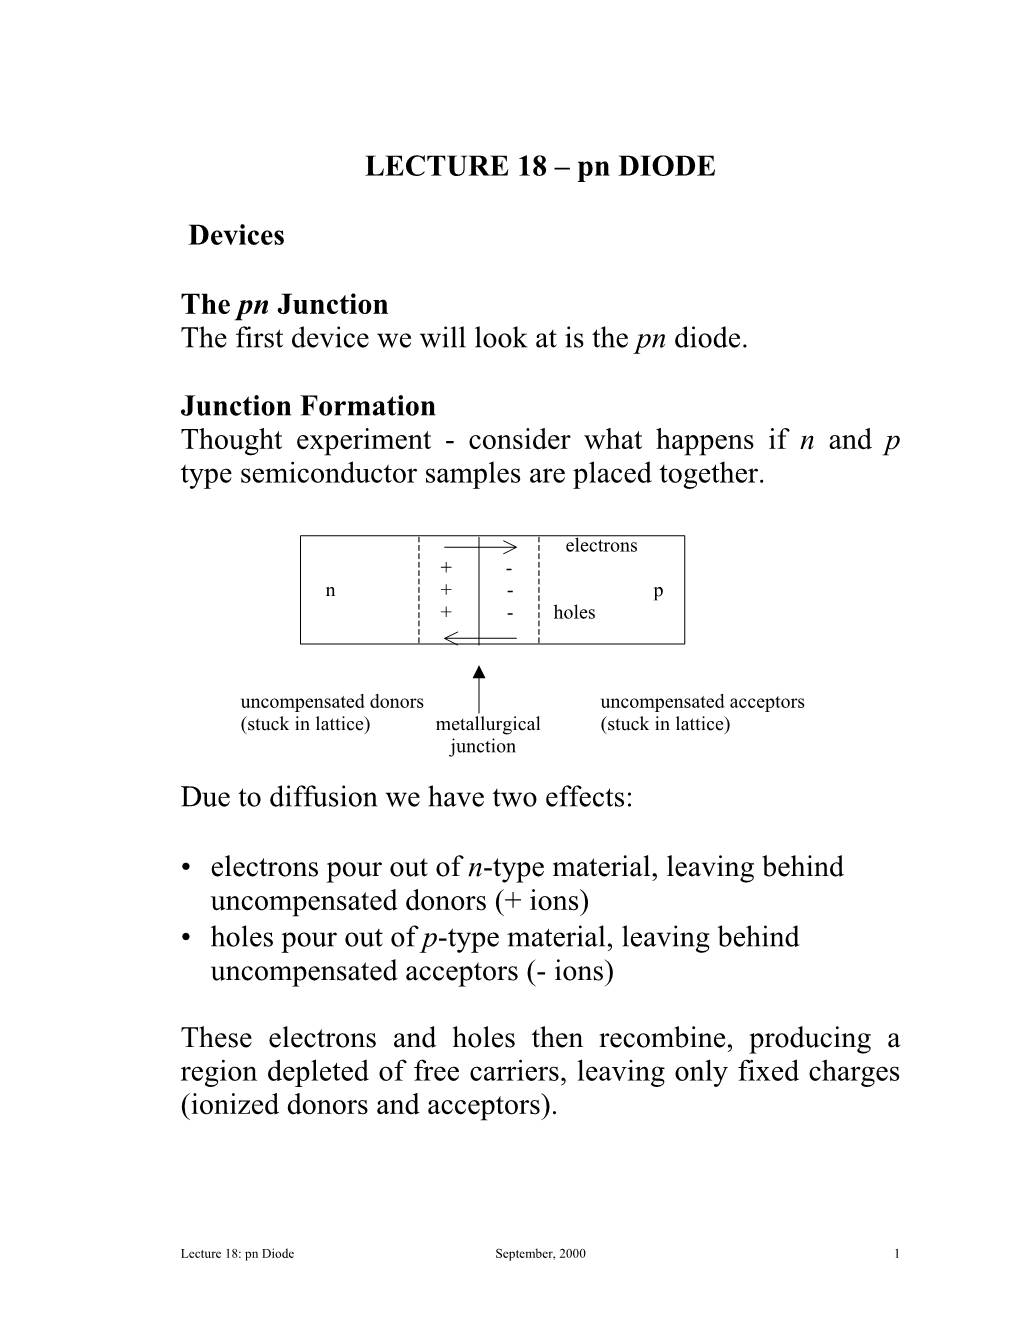 LECTURE 18 – Pn DIODE Devices the Pn Junction the First Device We